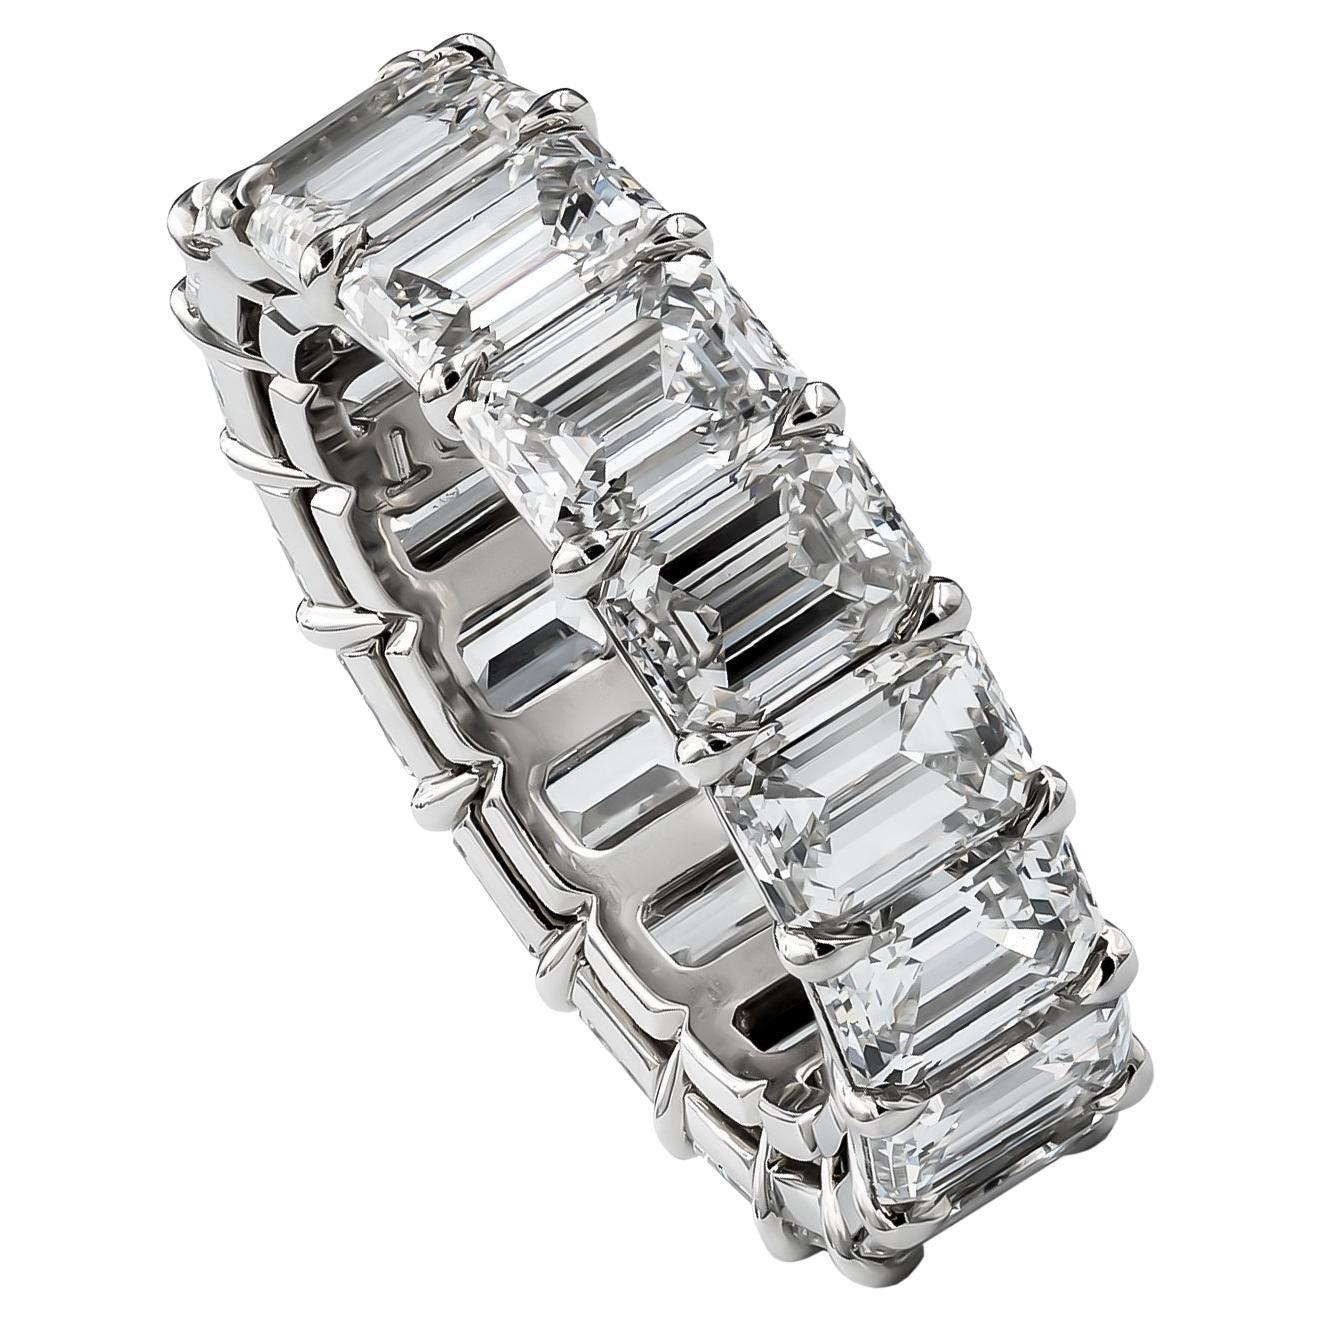 GIA Certified 9.01 Carat Eternity Band Ring